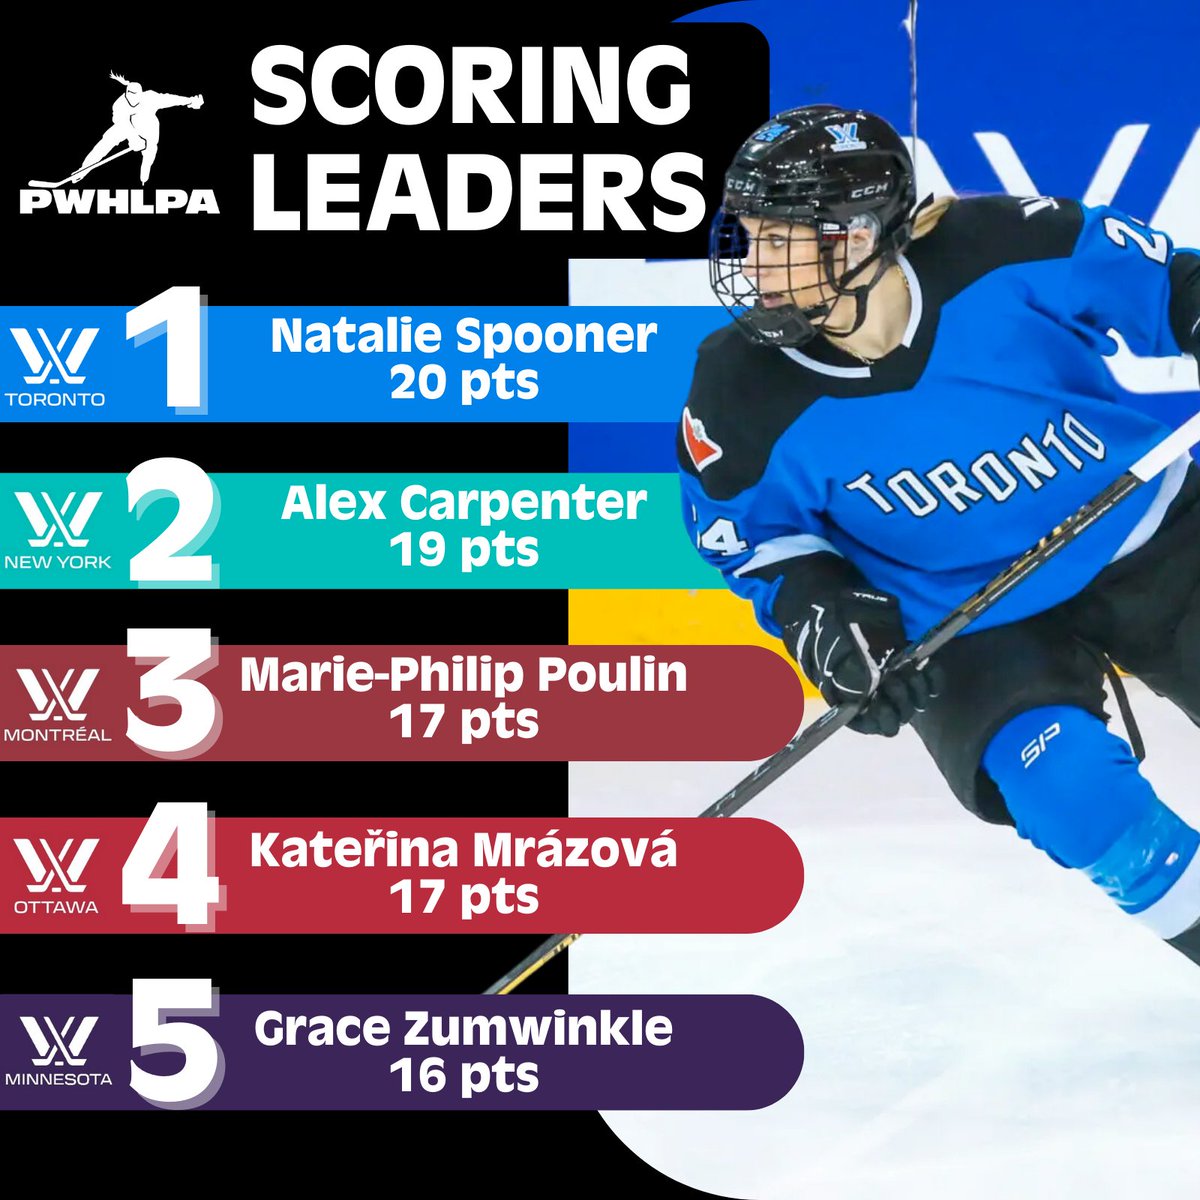 Toronto powerhouse @natspooner5 served up 20 points to secure her spot at the top of the leaderboard as @thepwhlofficial hits pause for Worlds. The race resumes April 18! 📈